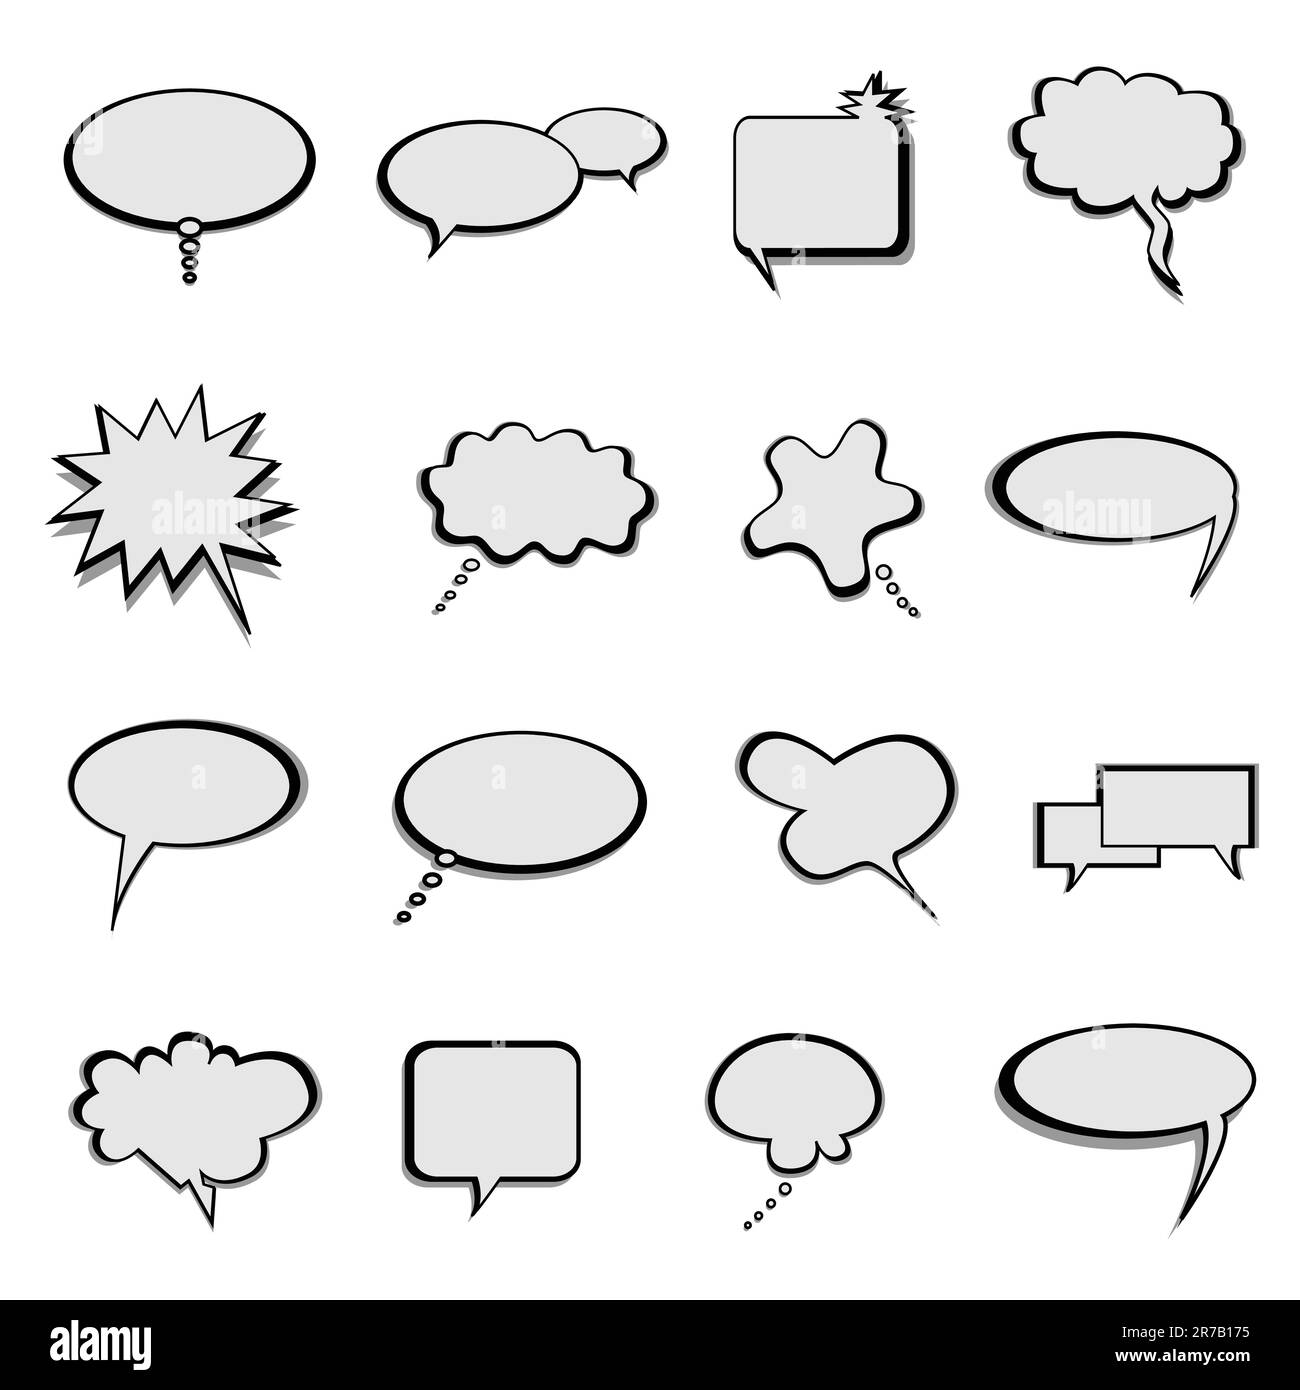 Talk, thought and speech balloons or bubbles Stock Vector